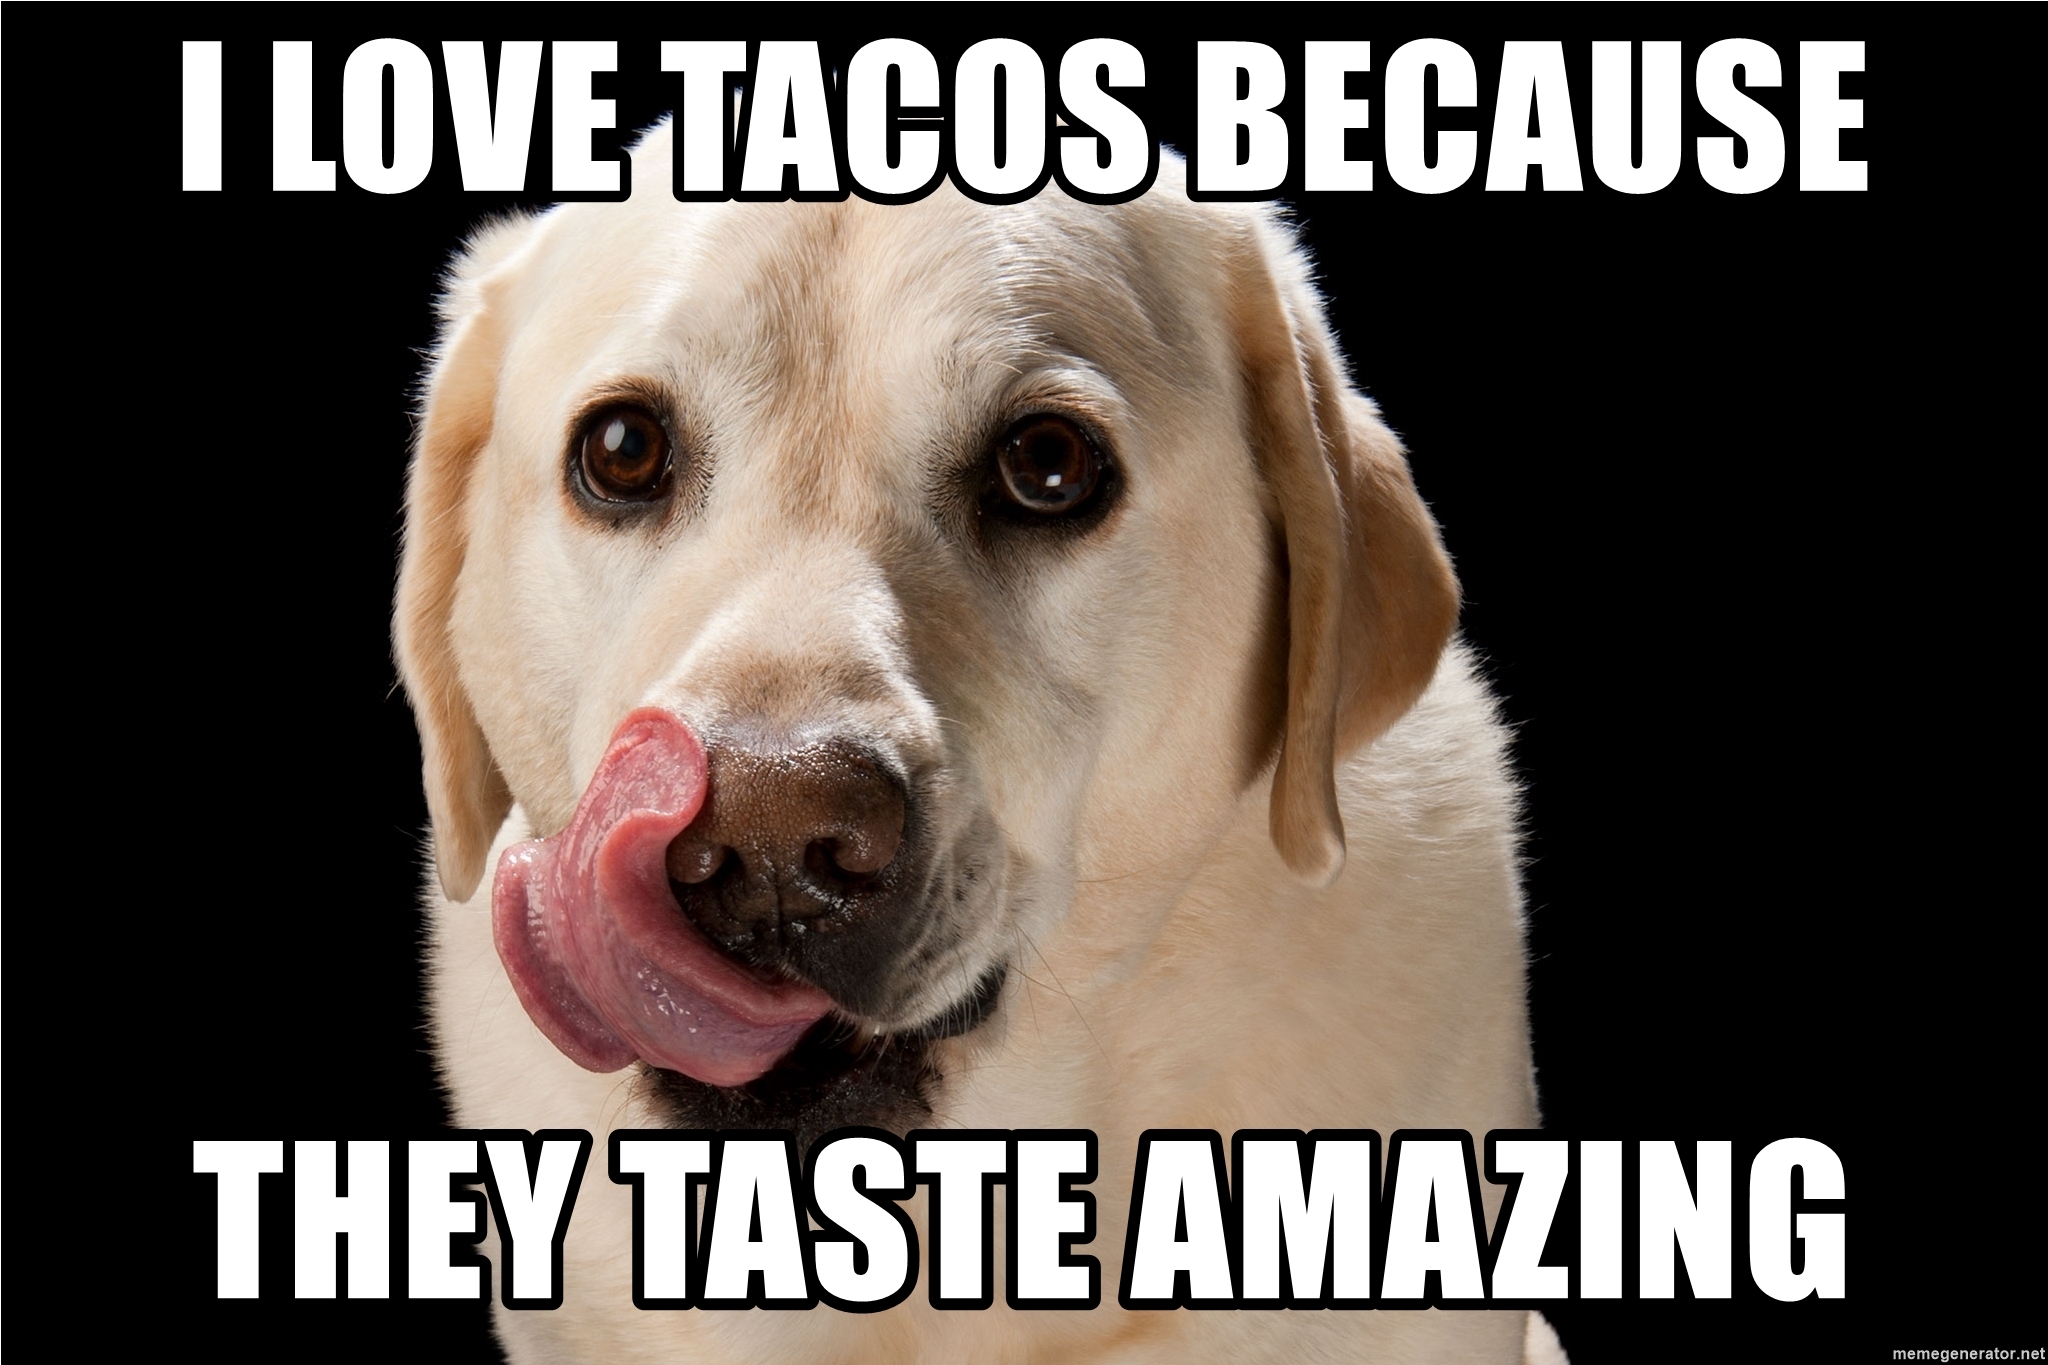 I love tacos because they taste amazing